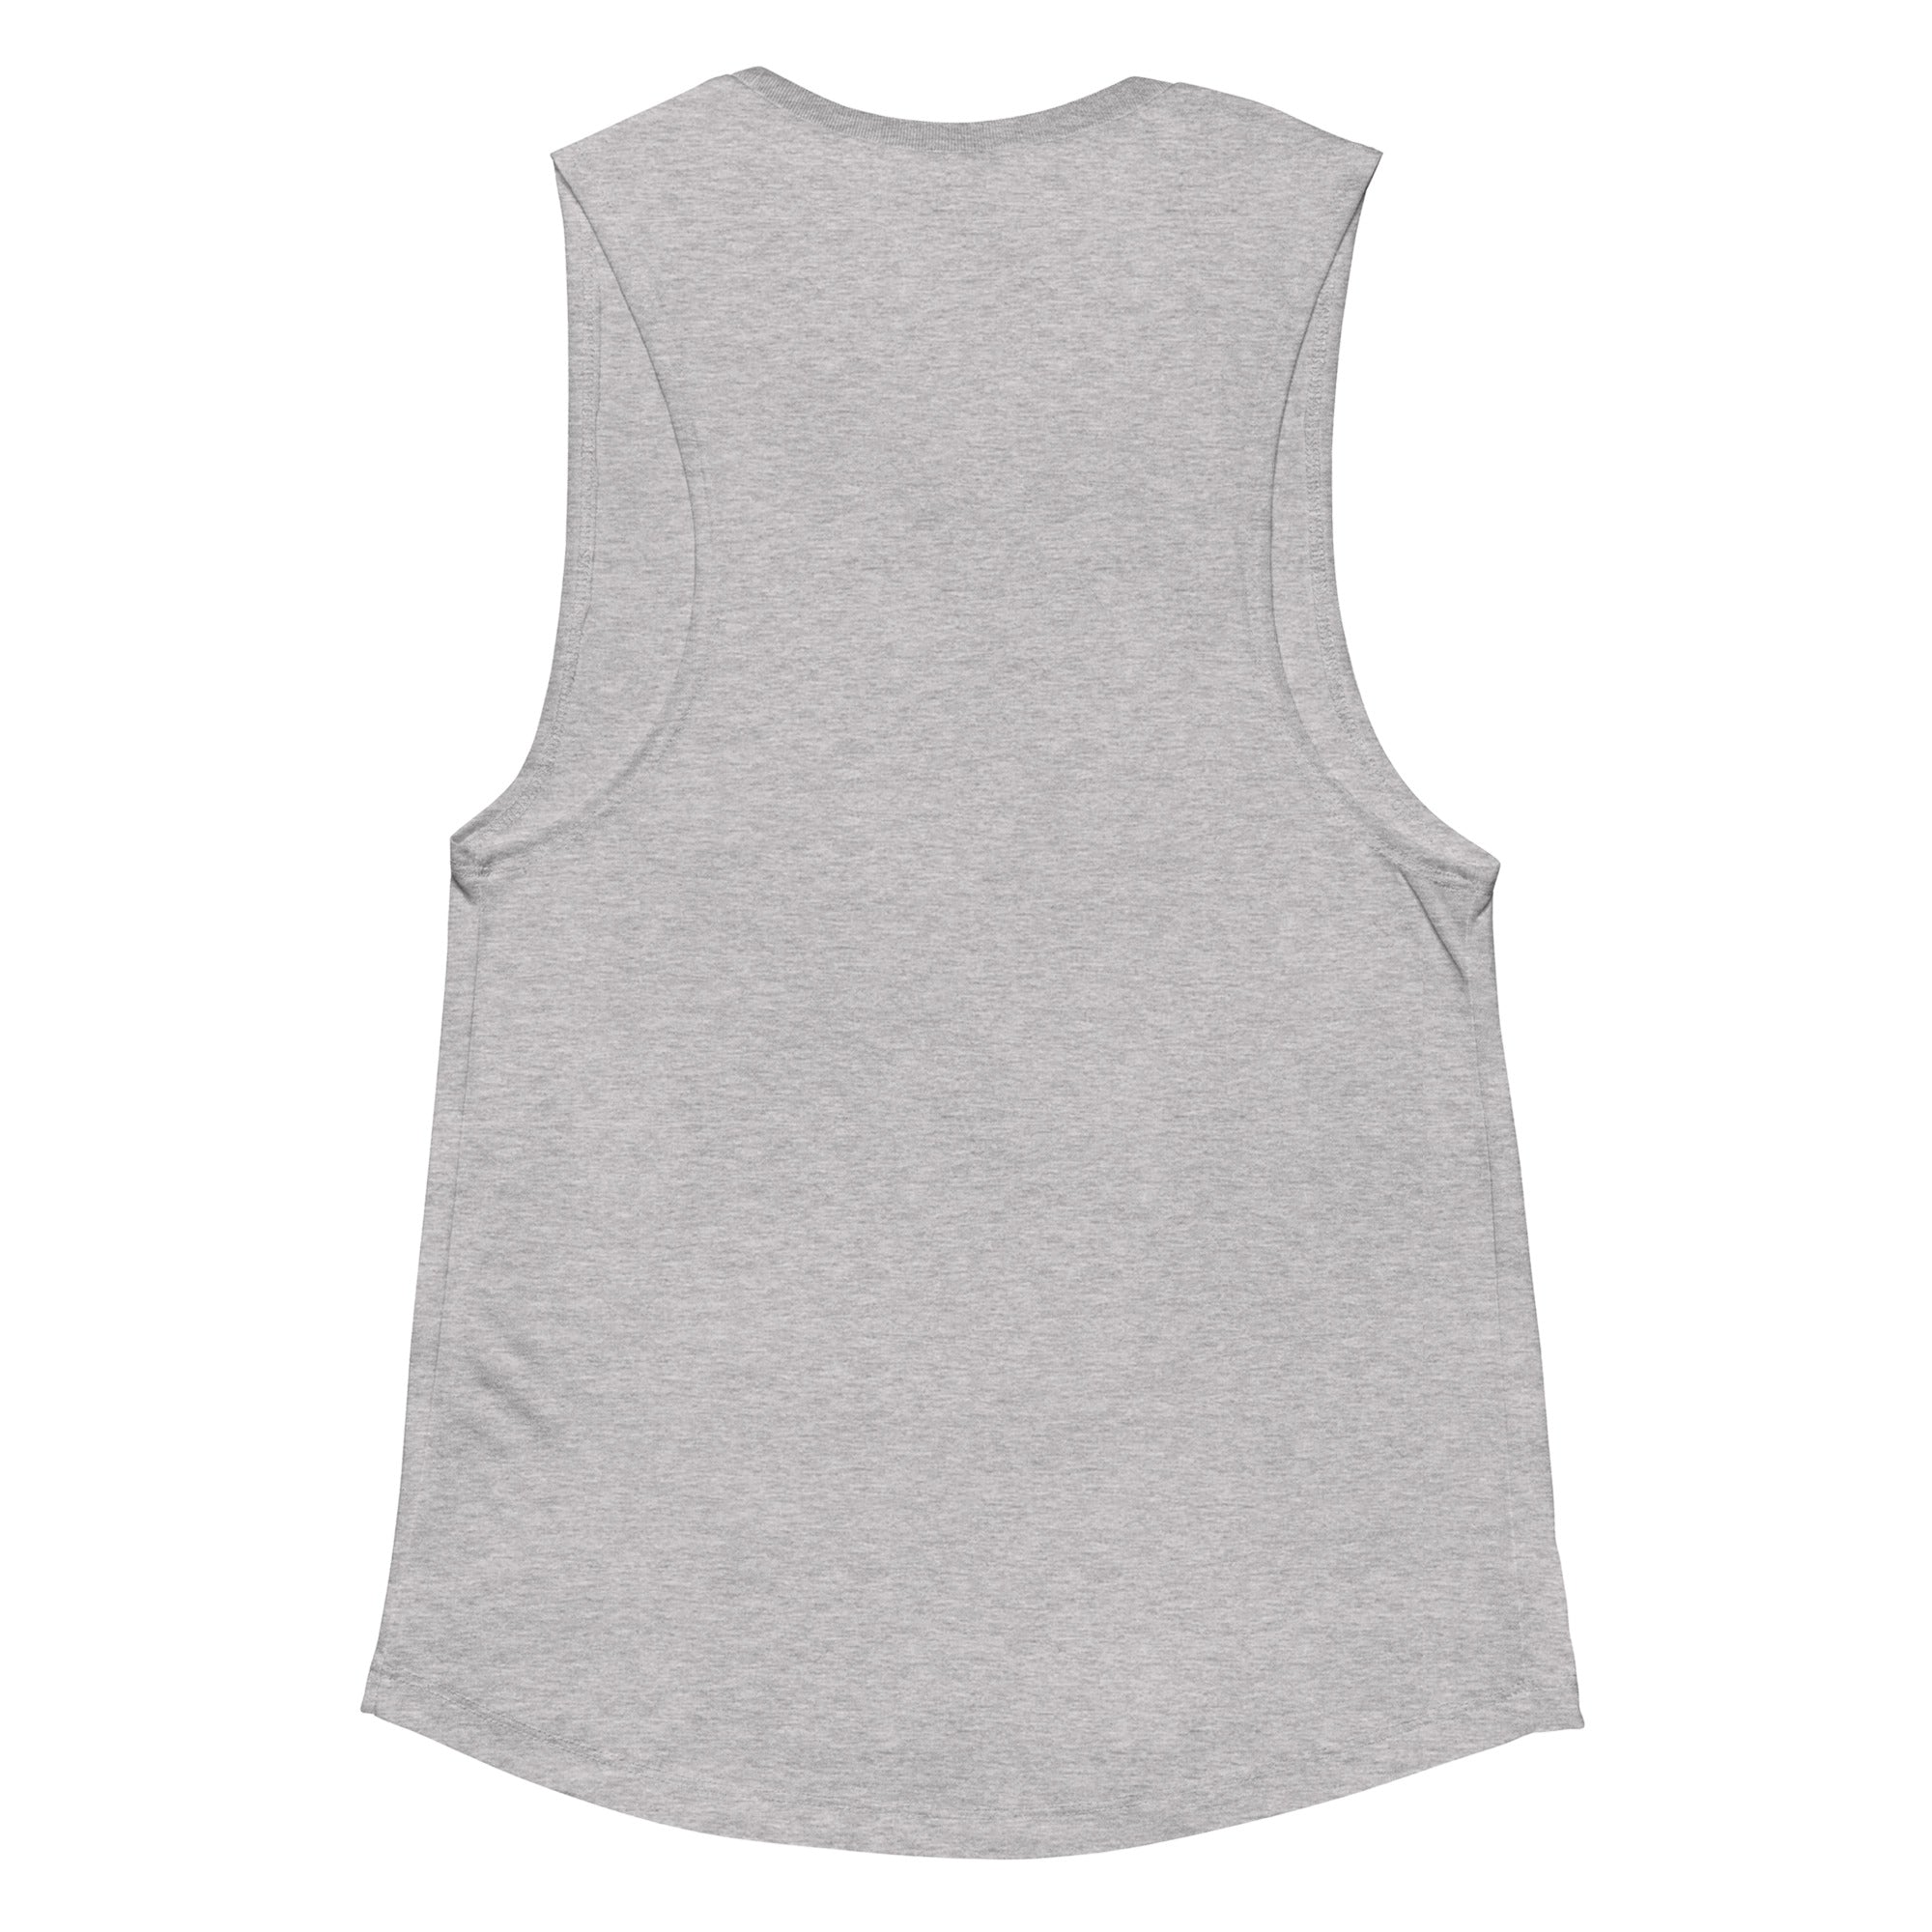 WOMEN'S MUSCLE TANK TOP – ATHLETIC HEATHER